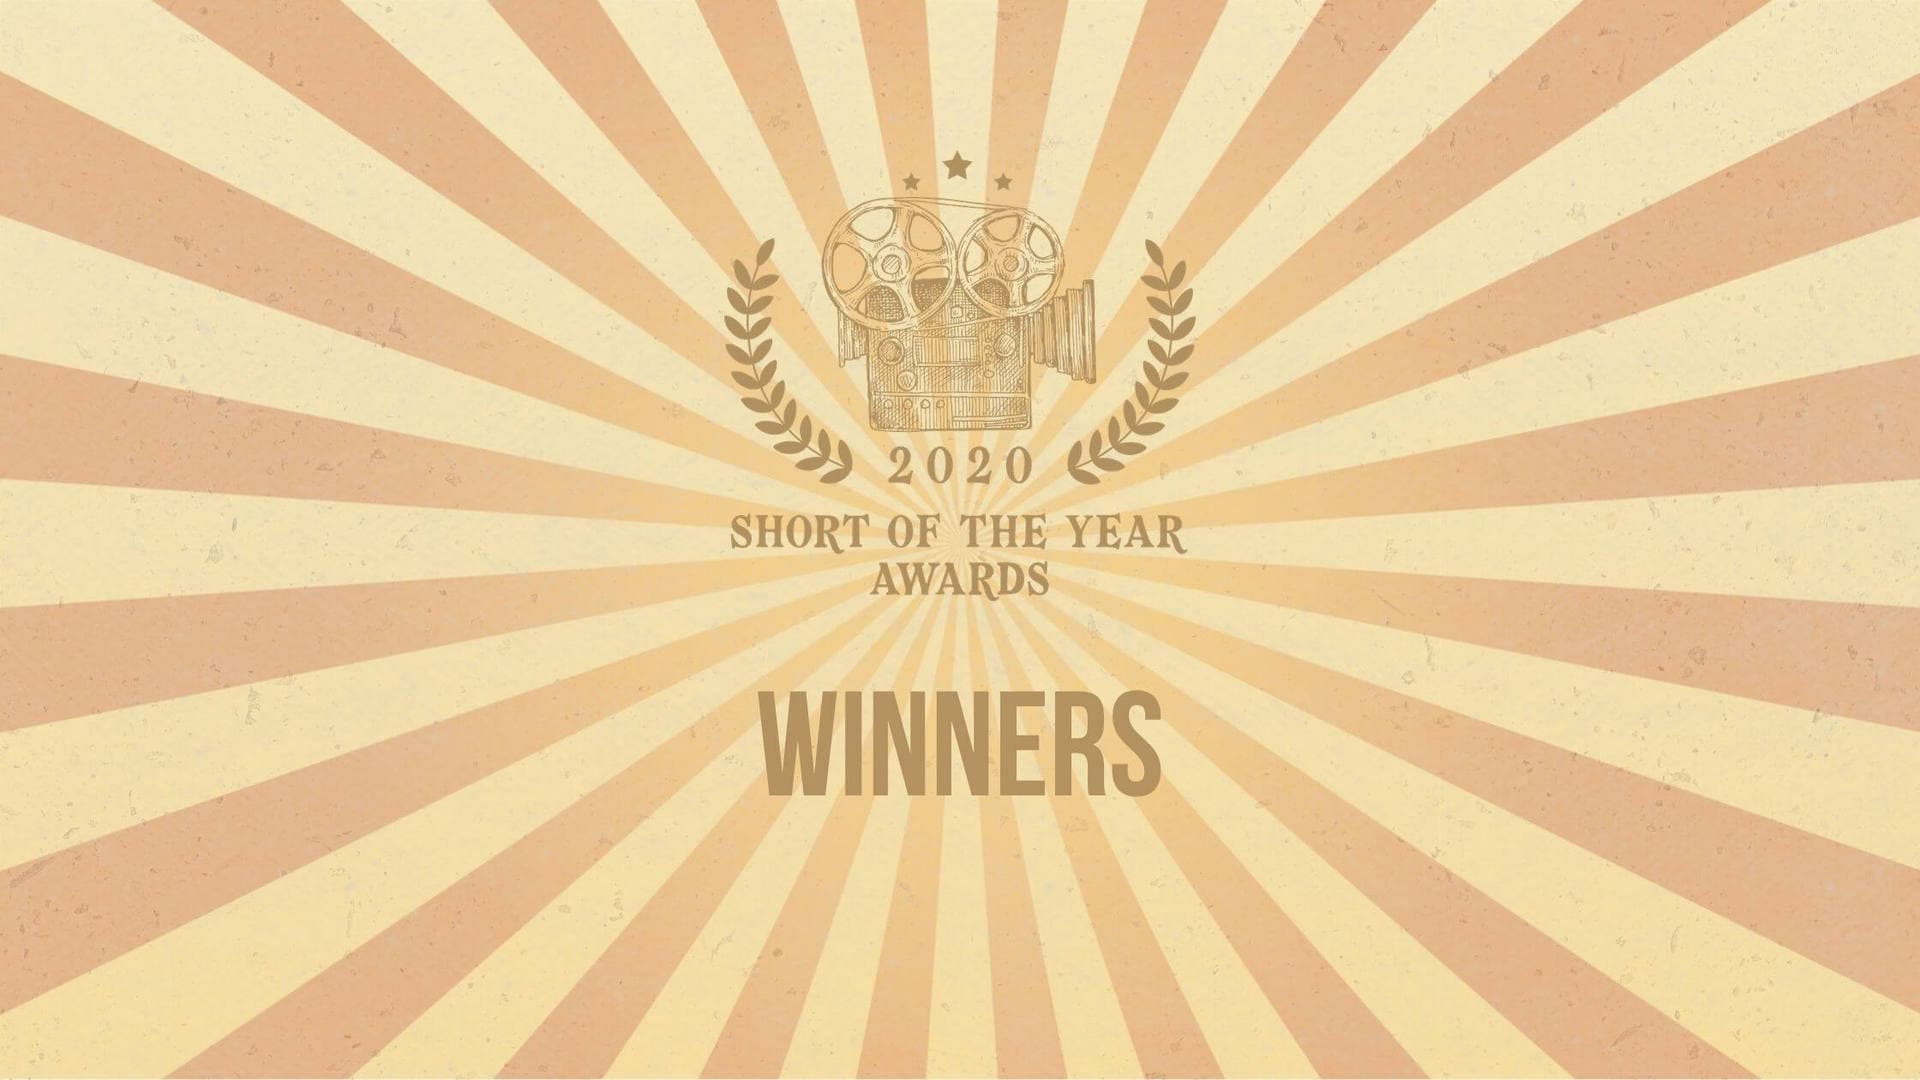 Winners - Short of the Year Awards 2020